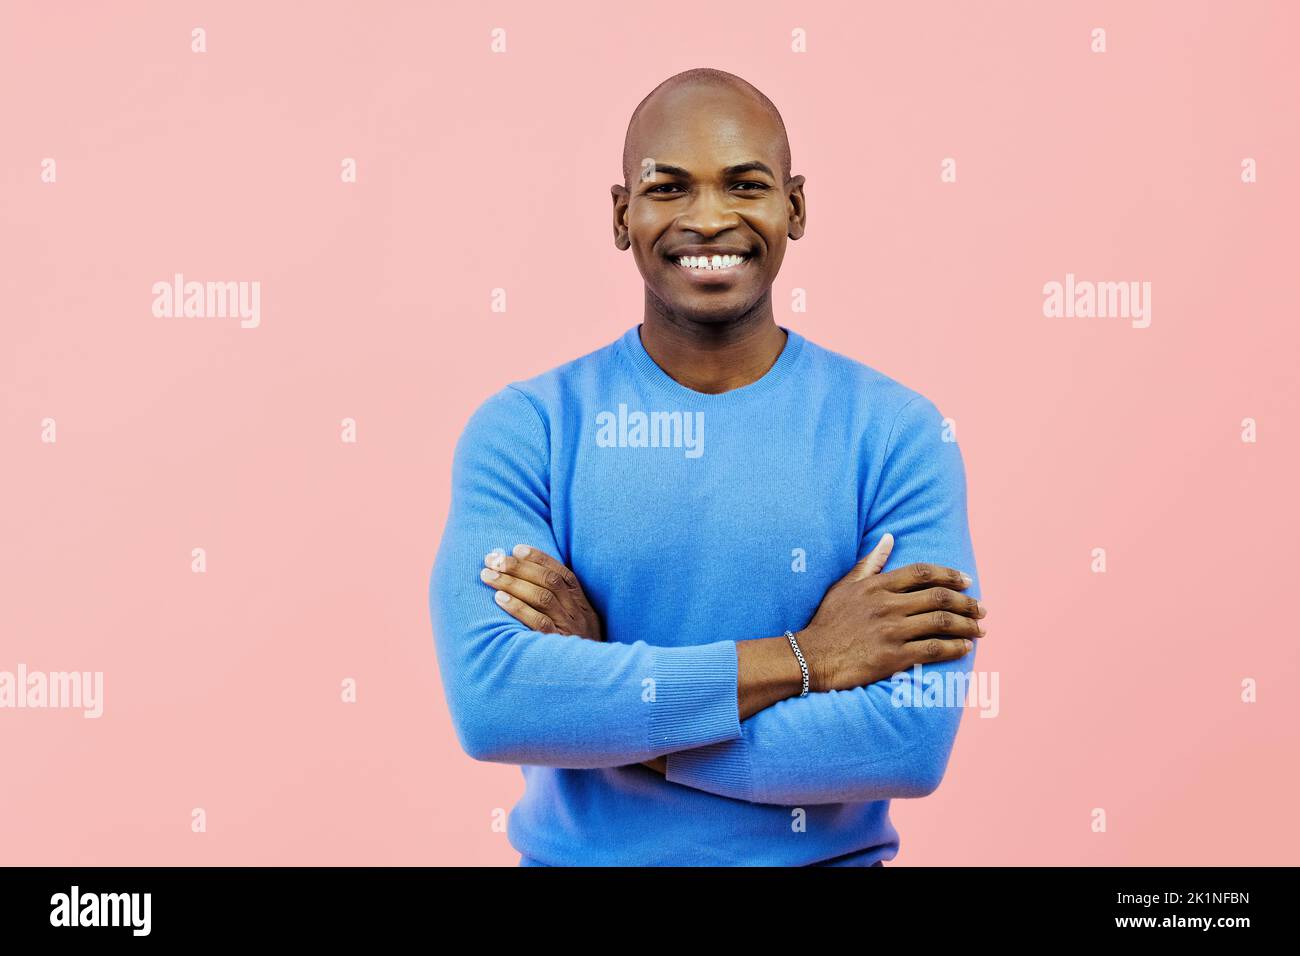 man smiling with folded arms indoors studio Stock Photo